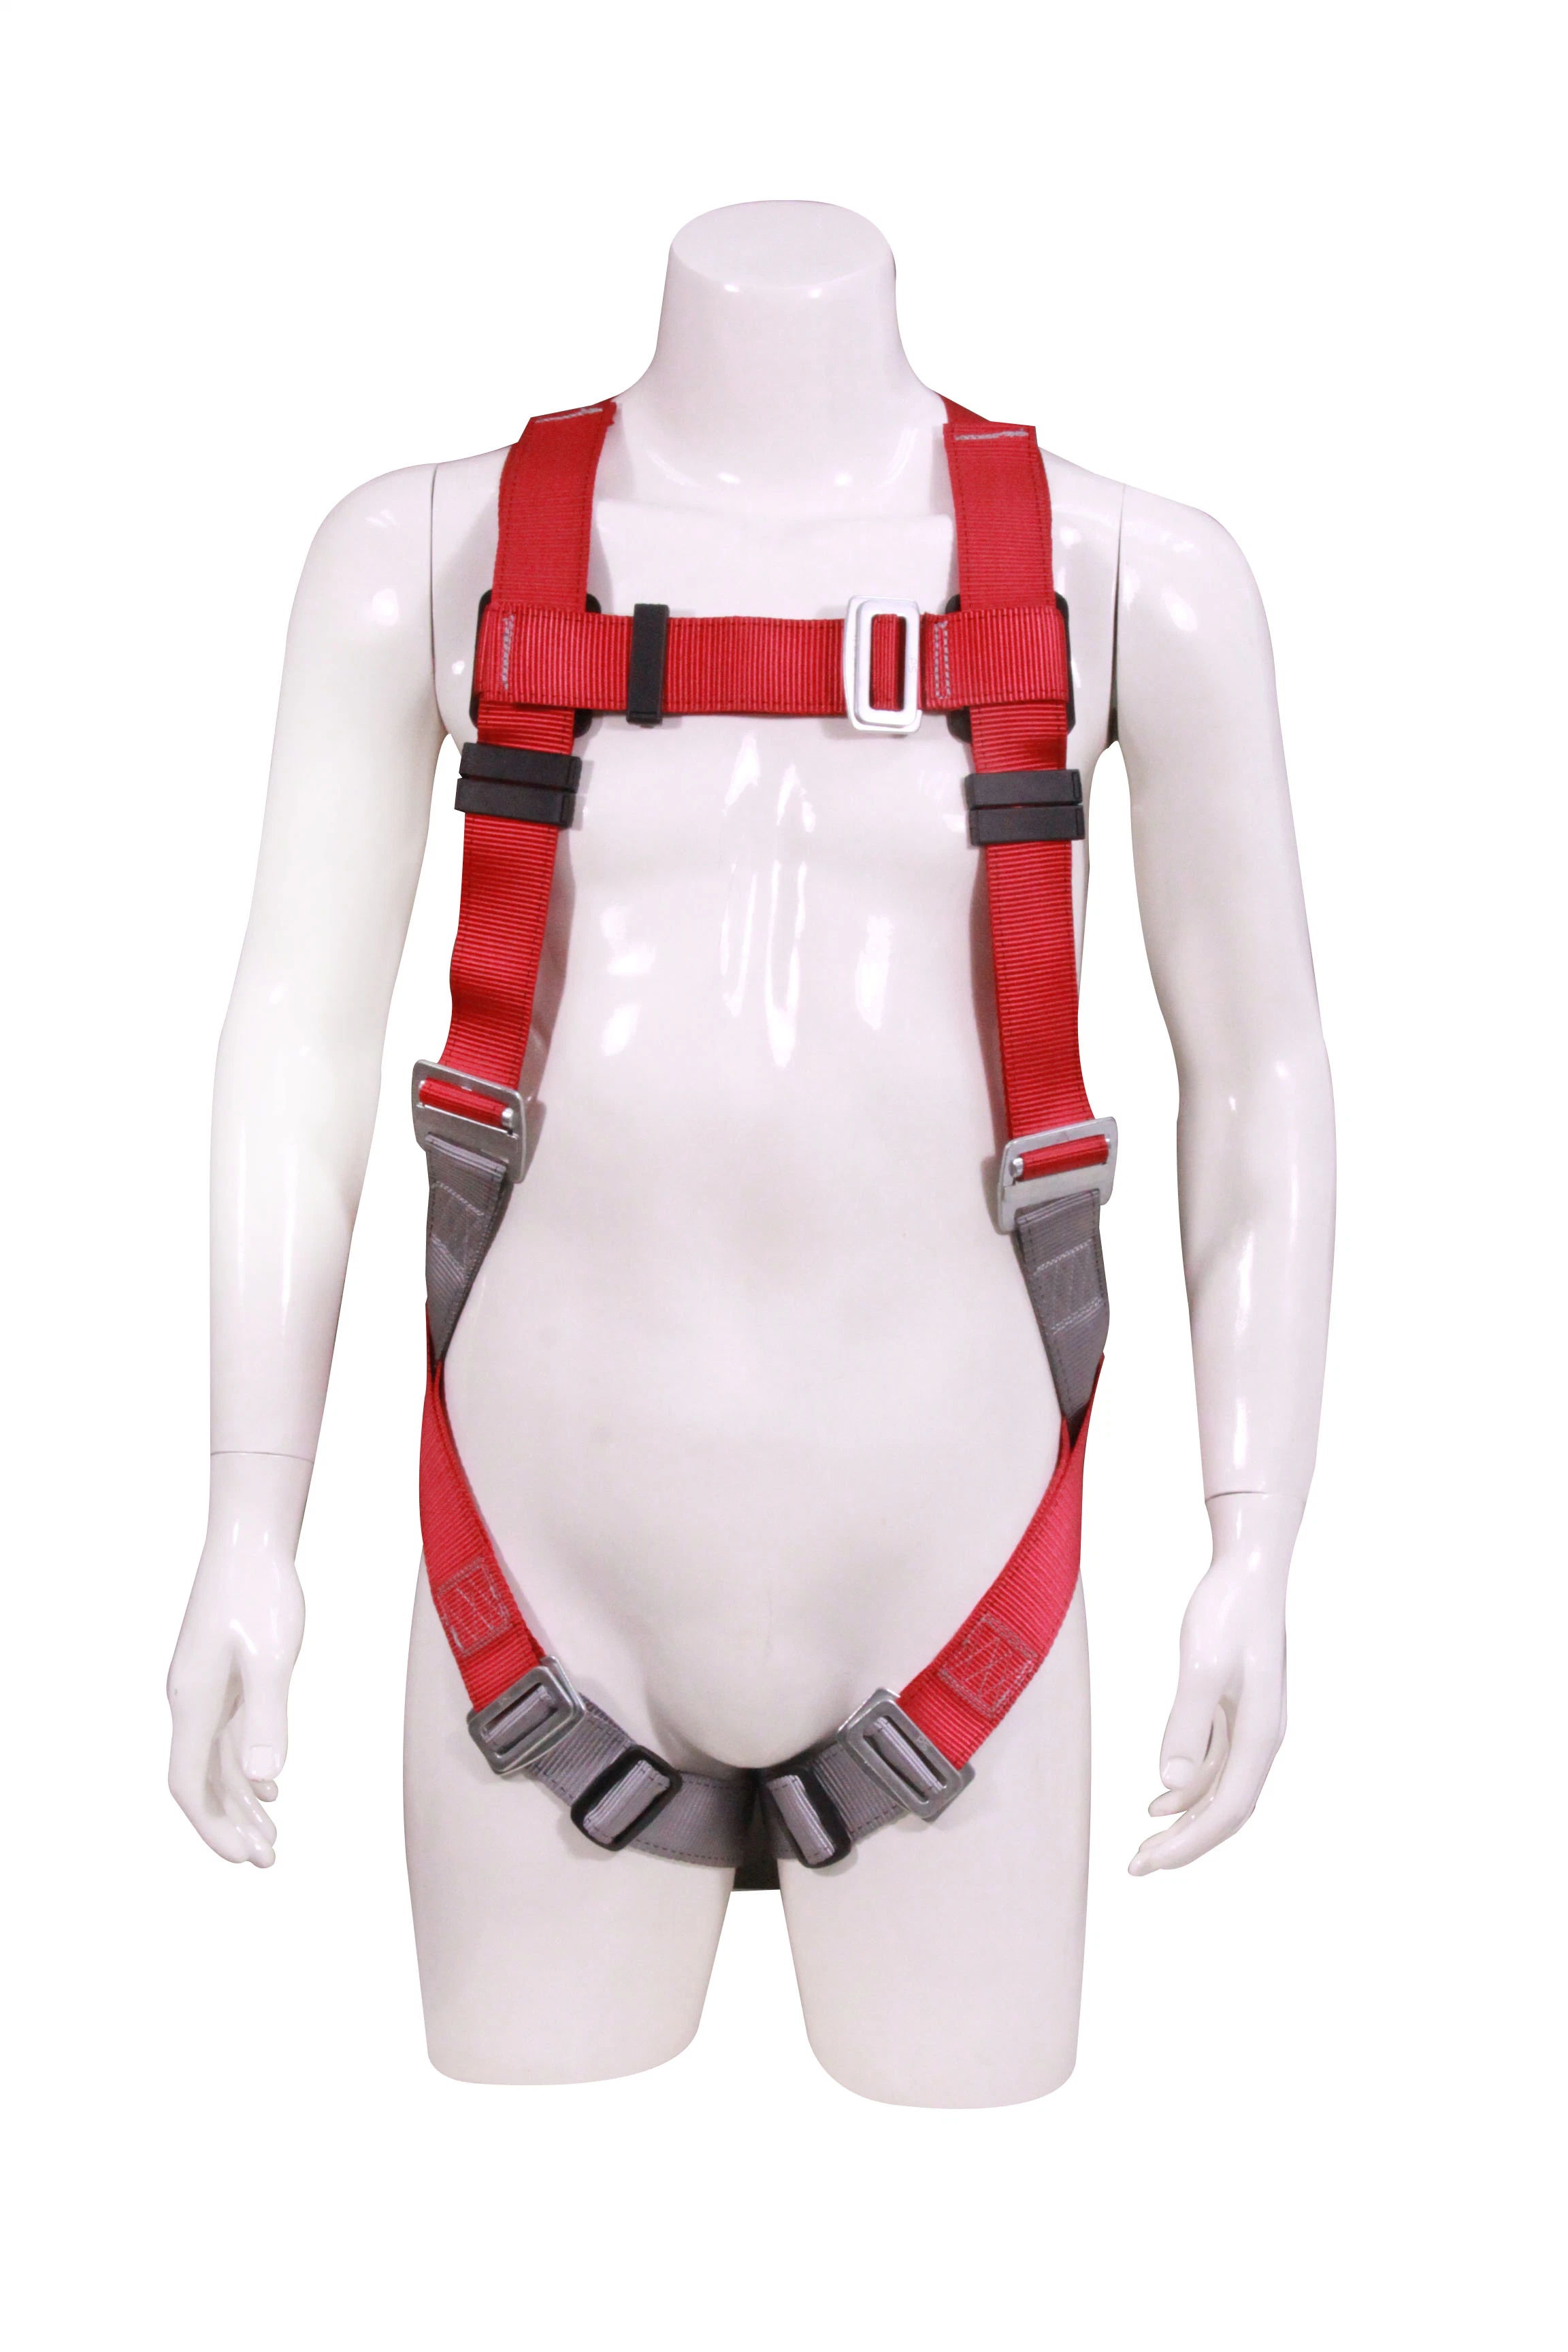 New High Quality Durable Electrician Belt Full Body Harness Safety